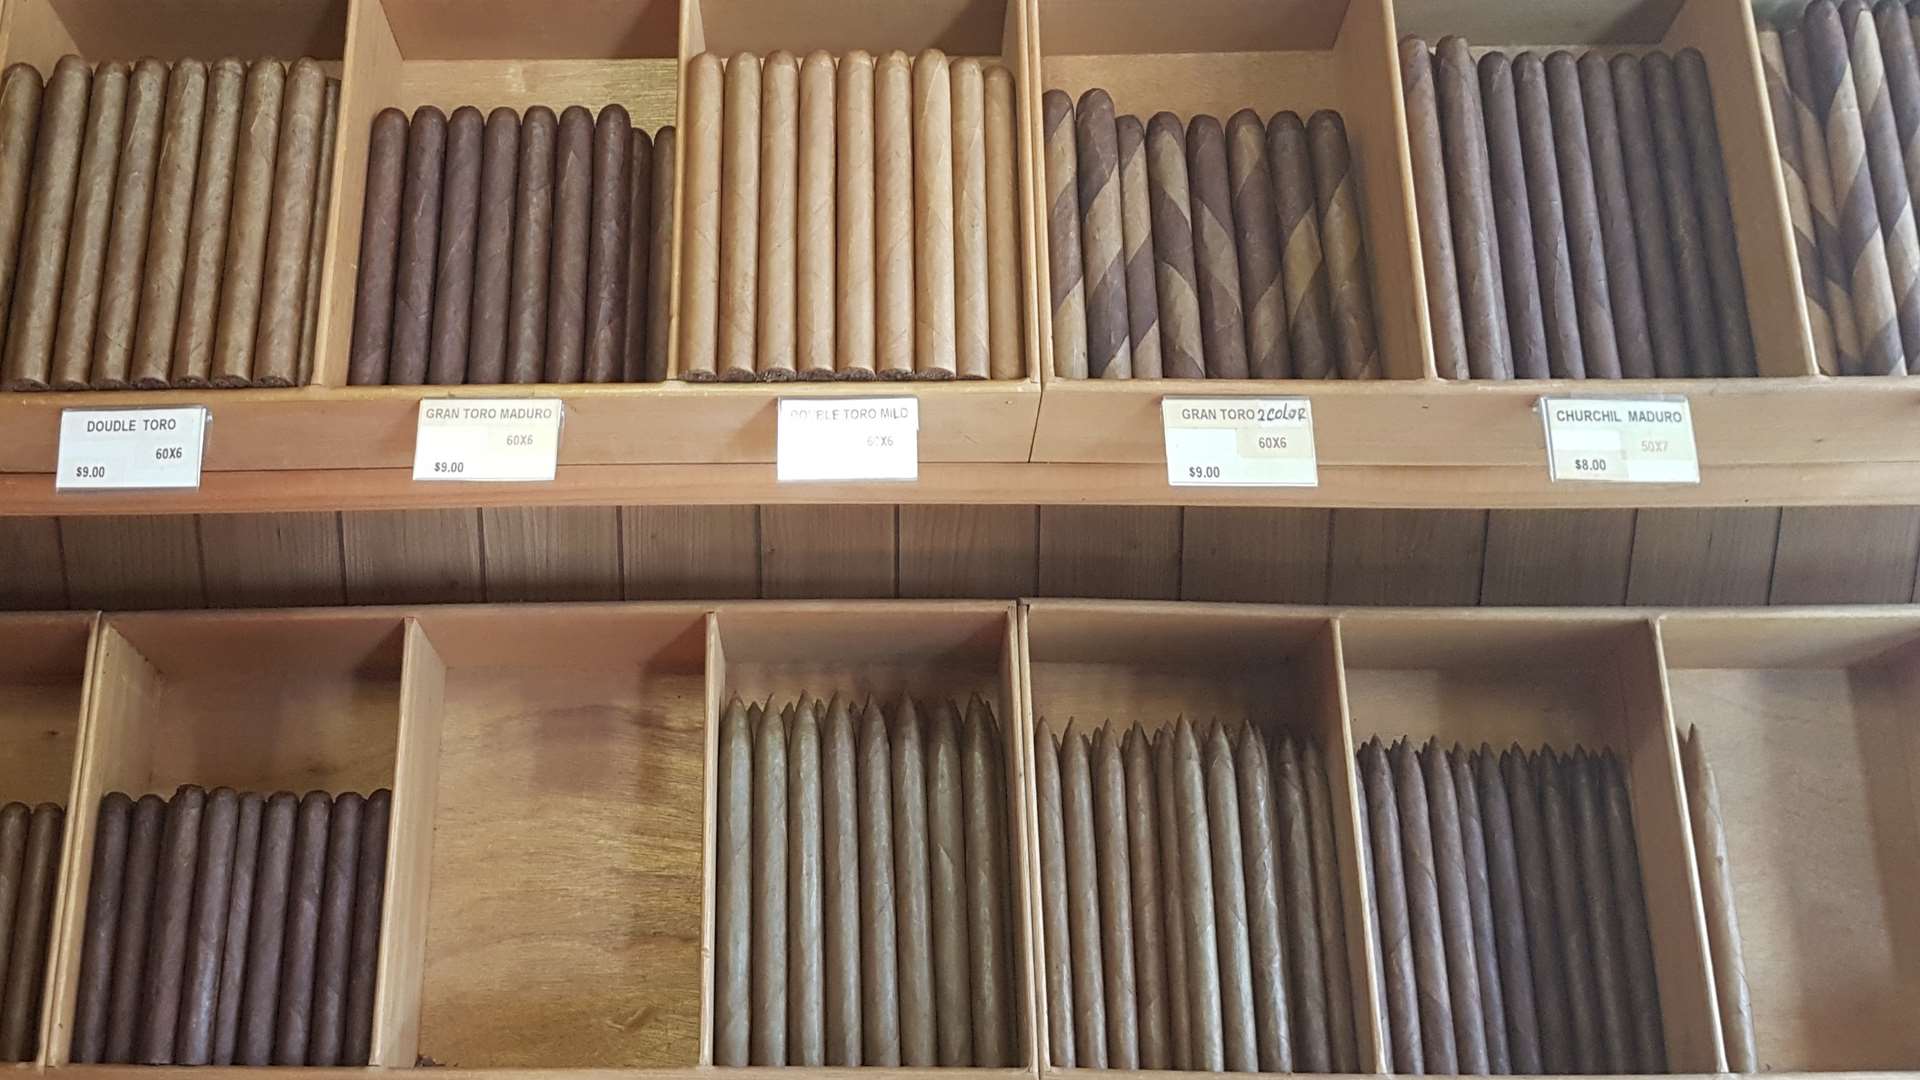 The cigars on offer at one of the shops in Ybor City